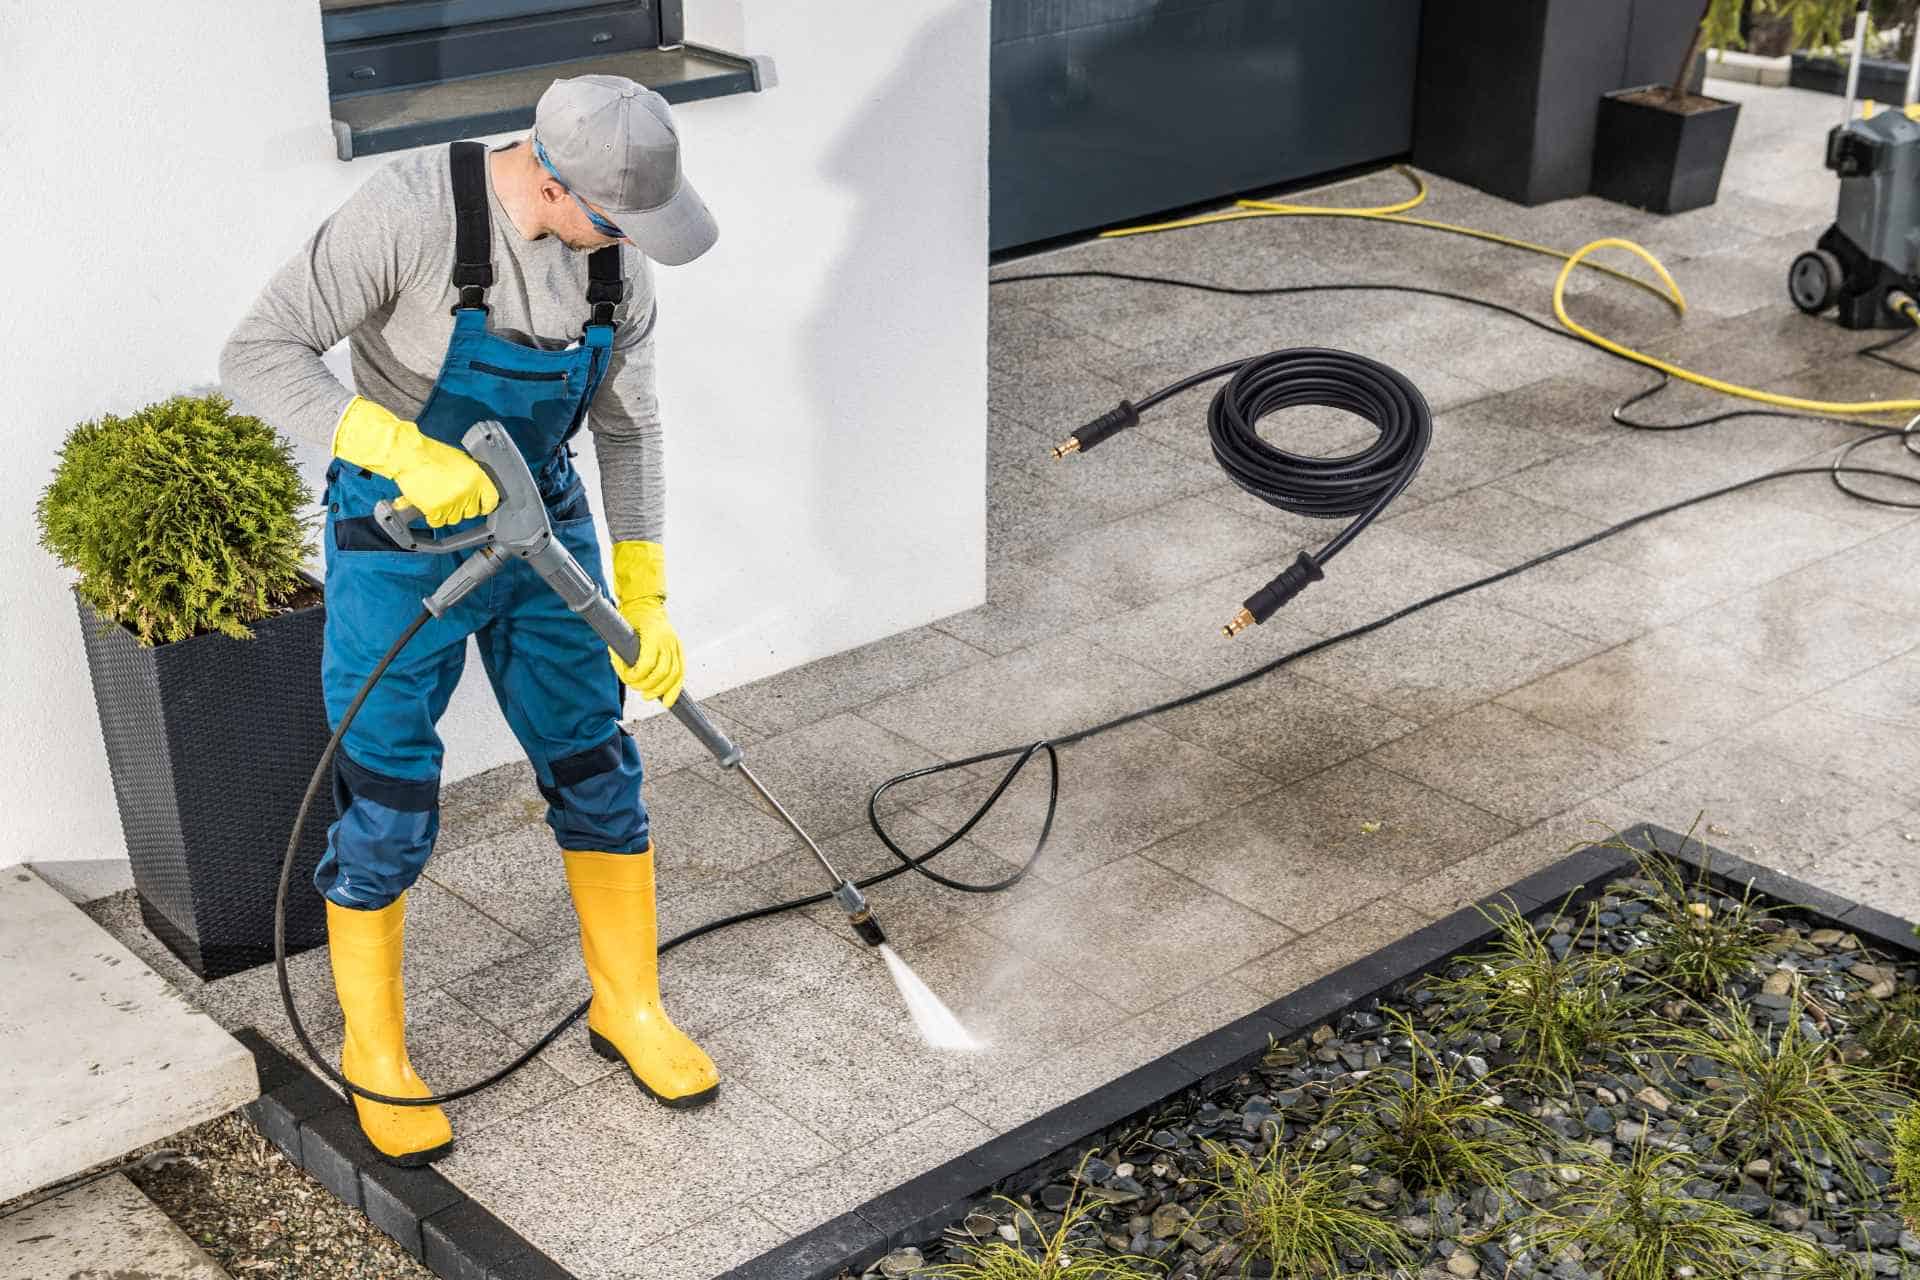 Finding the Best Garden Hose for Pressure Washer Our Top 9 Picks